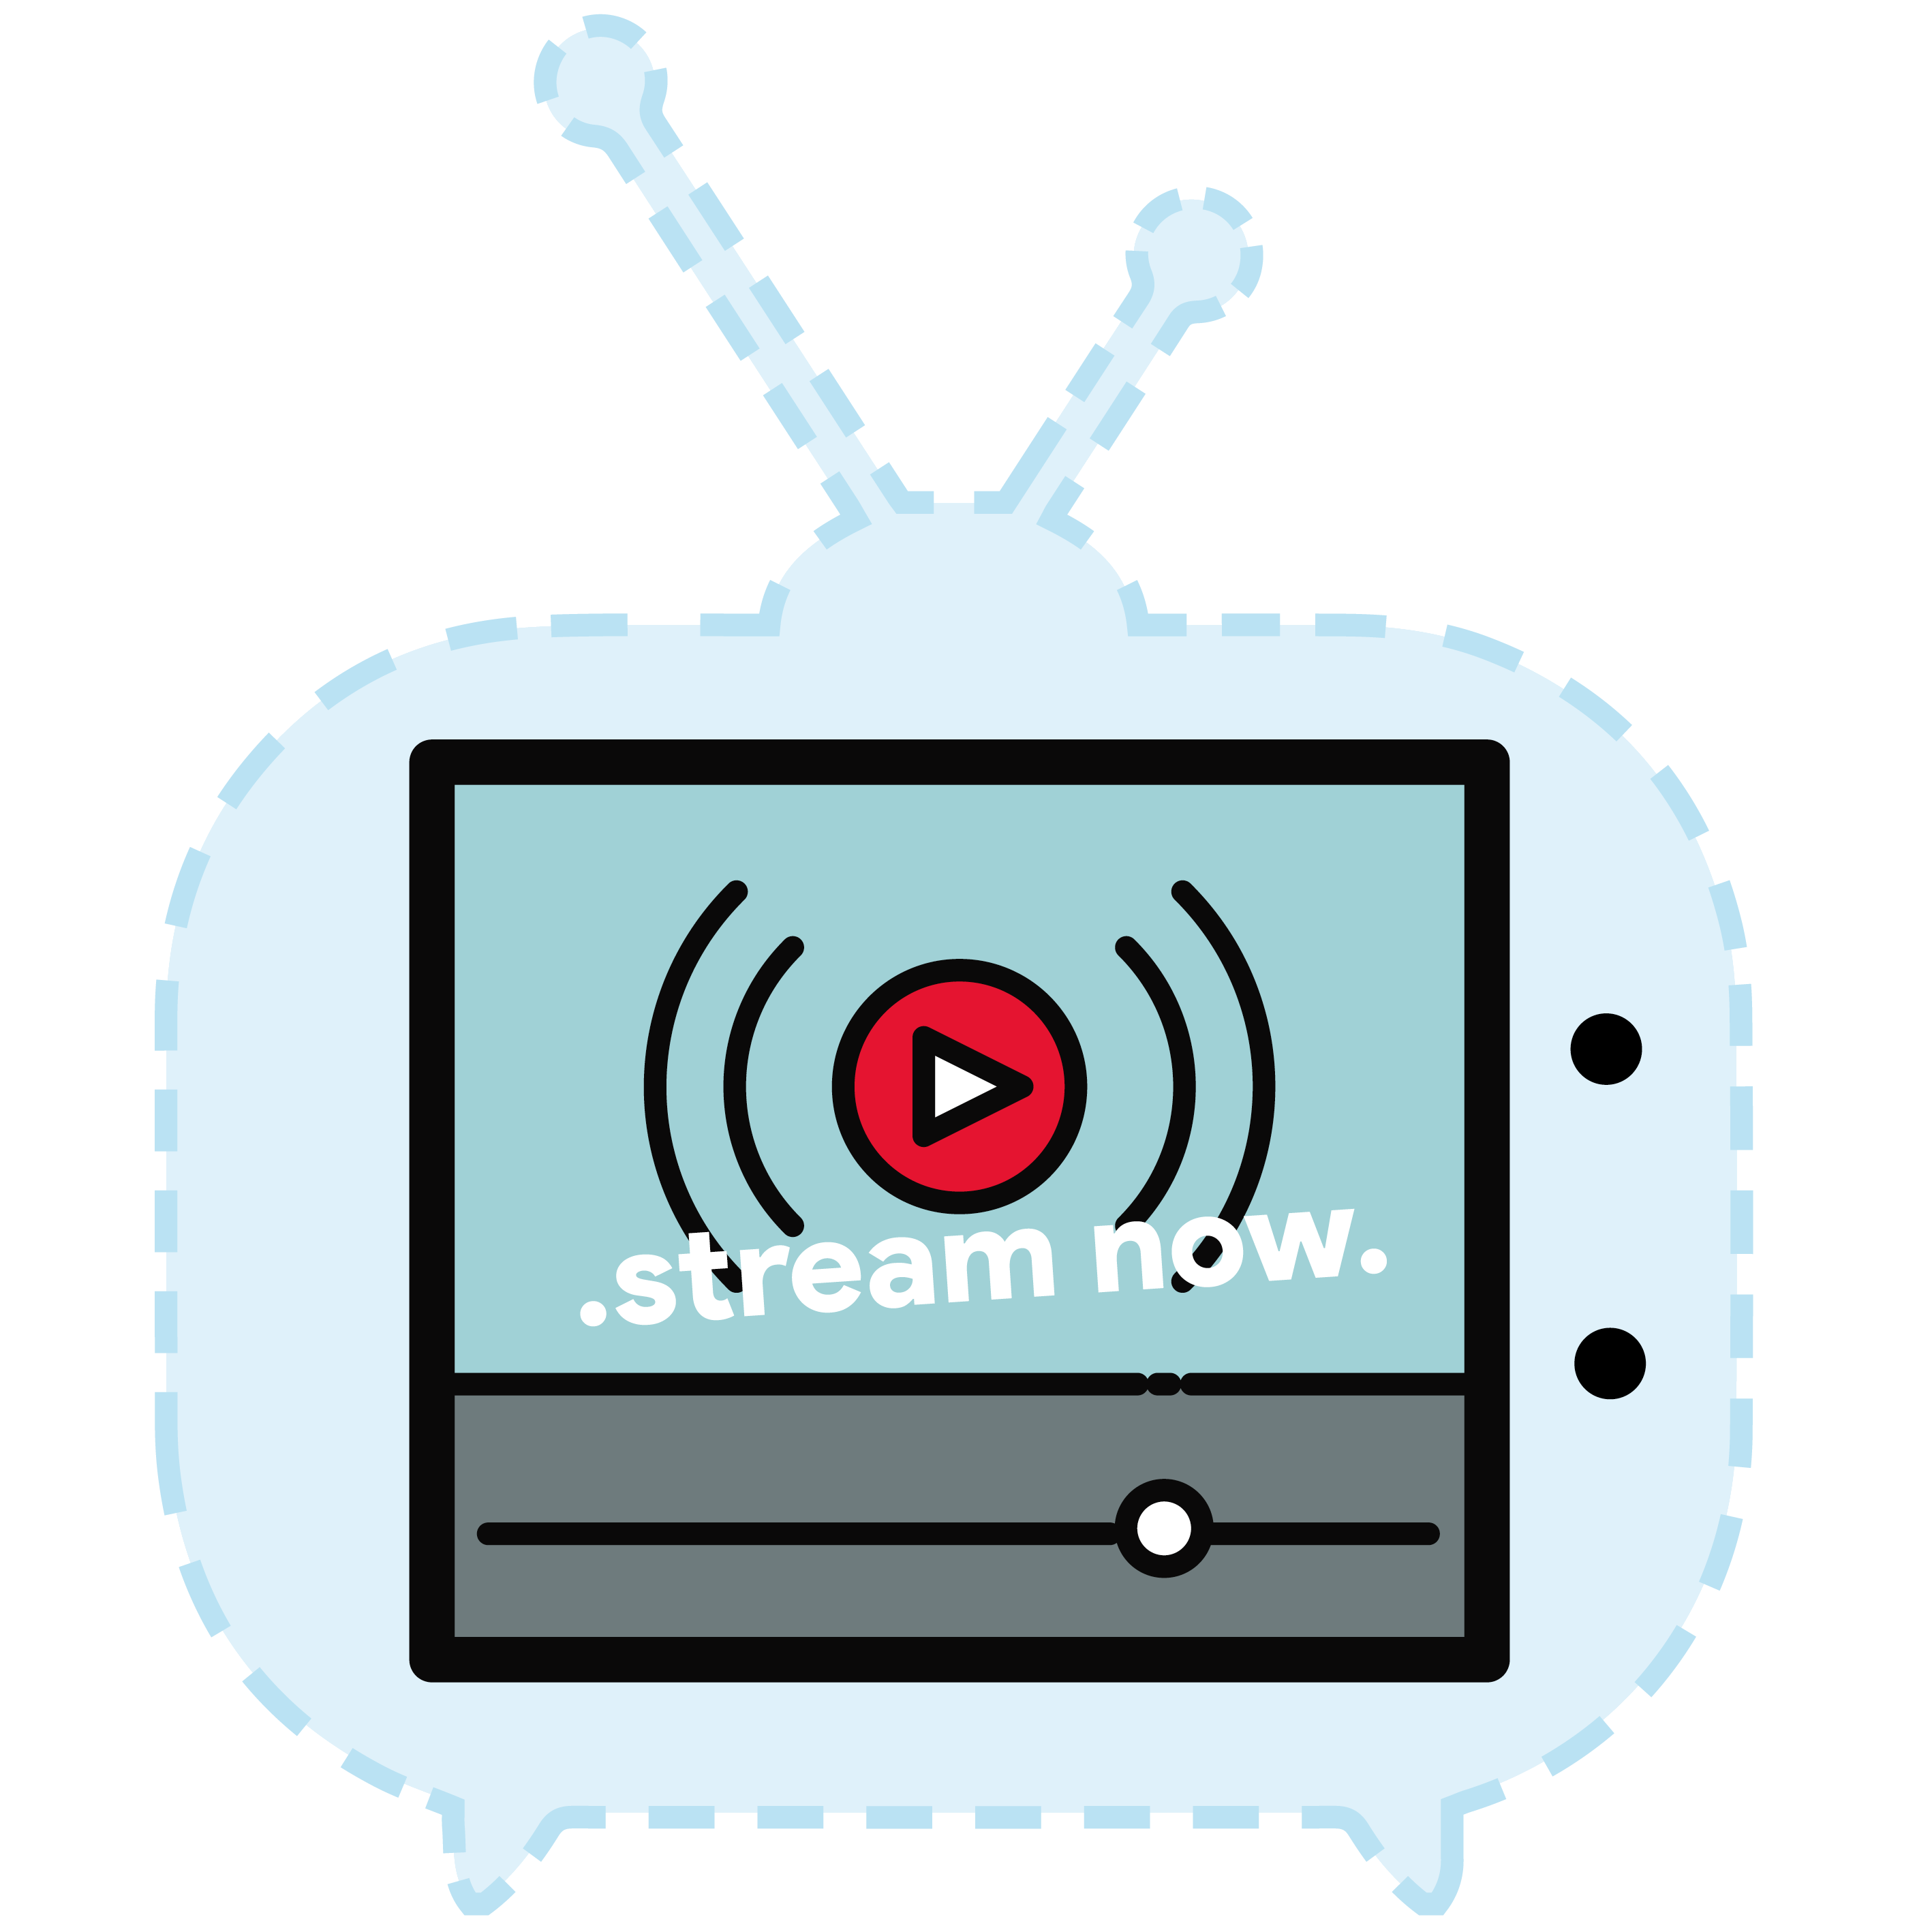 Sticker to the article: a TV with a play button and the text "stream now"